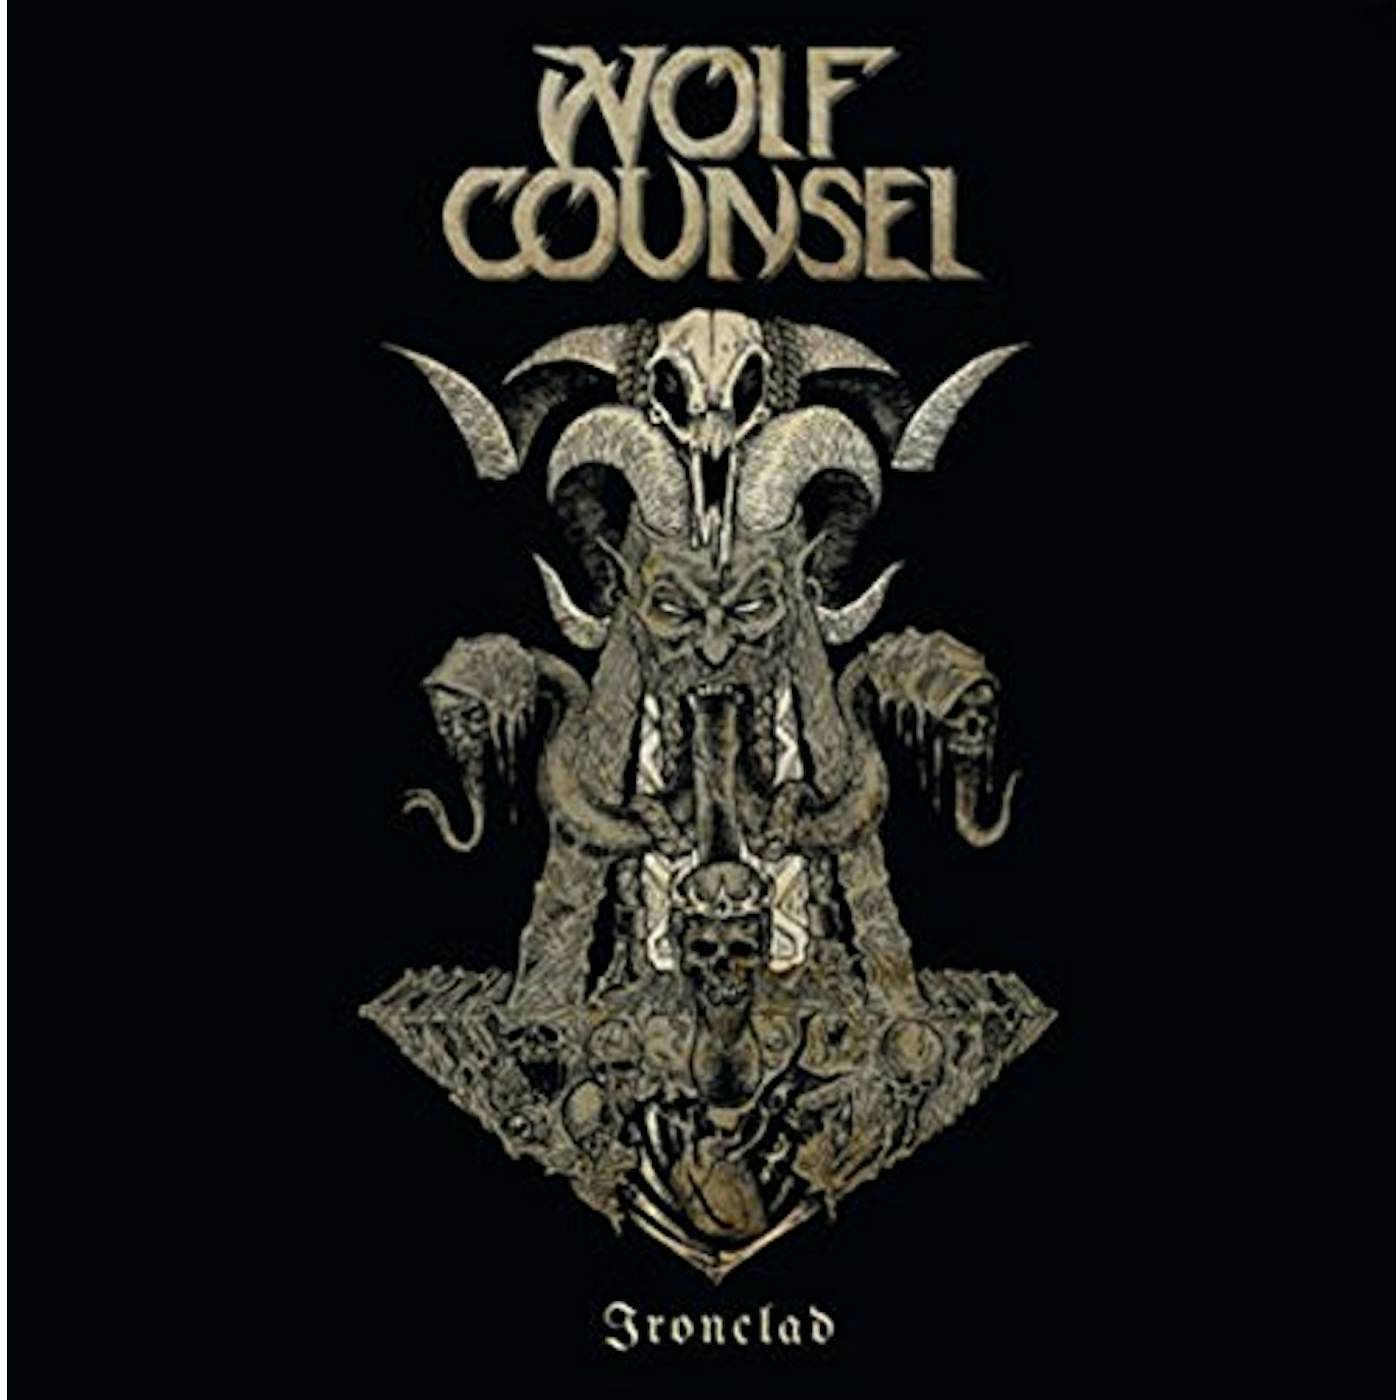 Wolf Counsel IRONCLAD CD